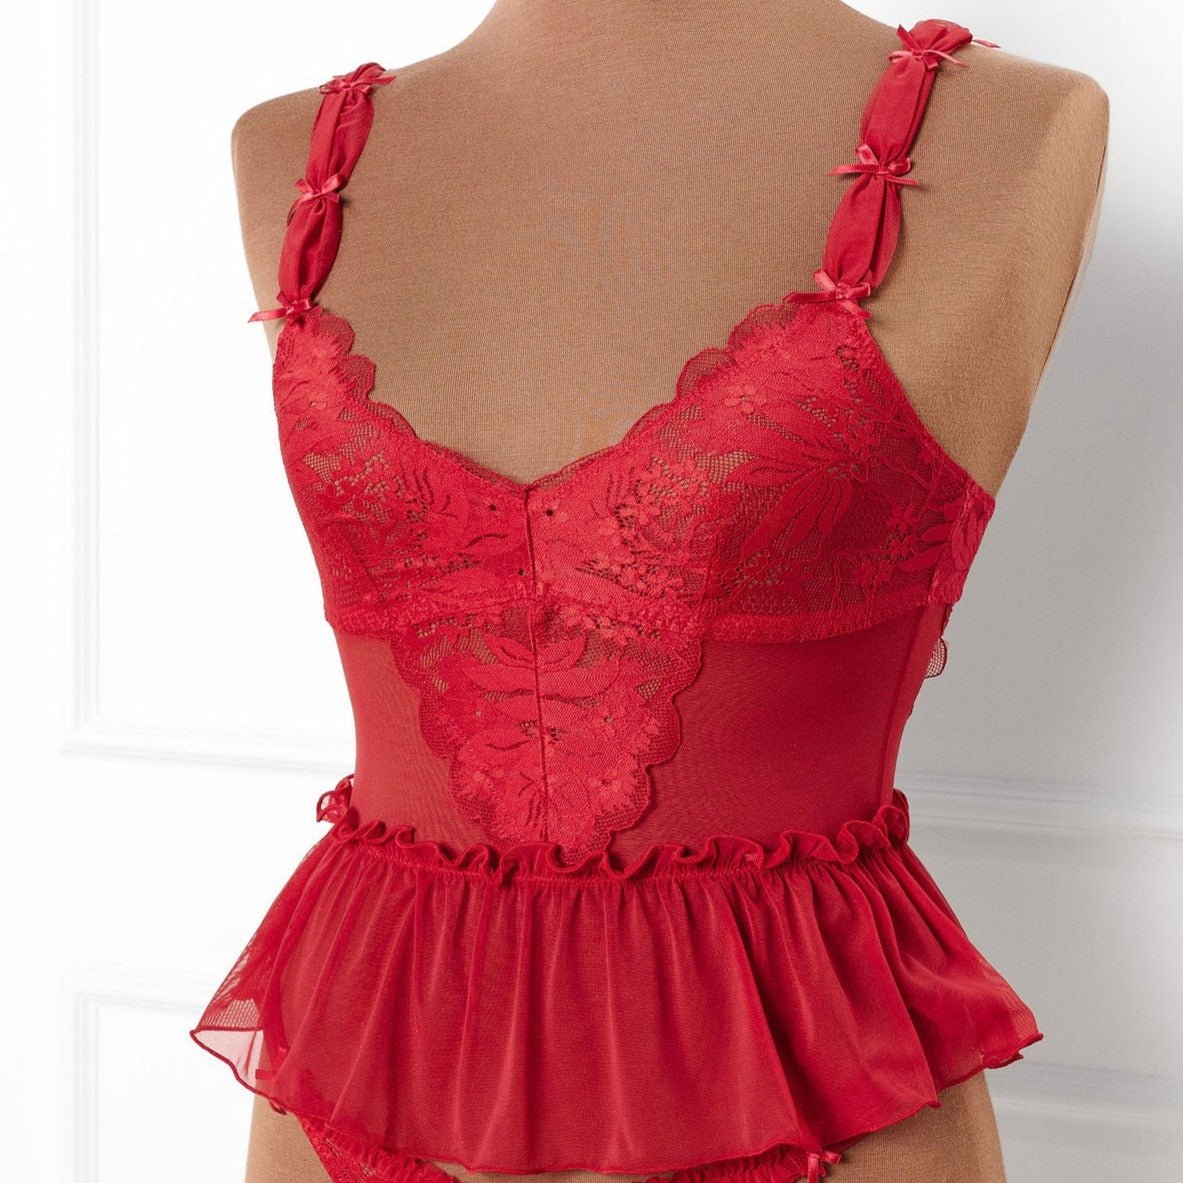 Lace & Mesh Peplum Corset - Scarlet Red by Mentionables